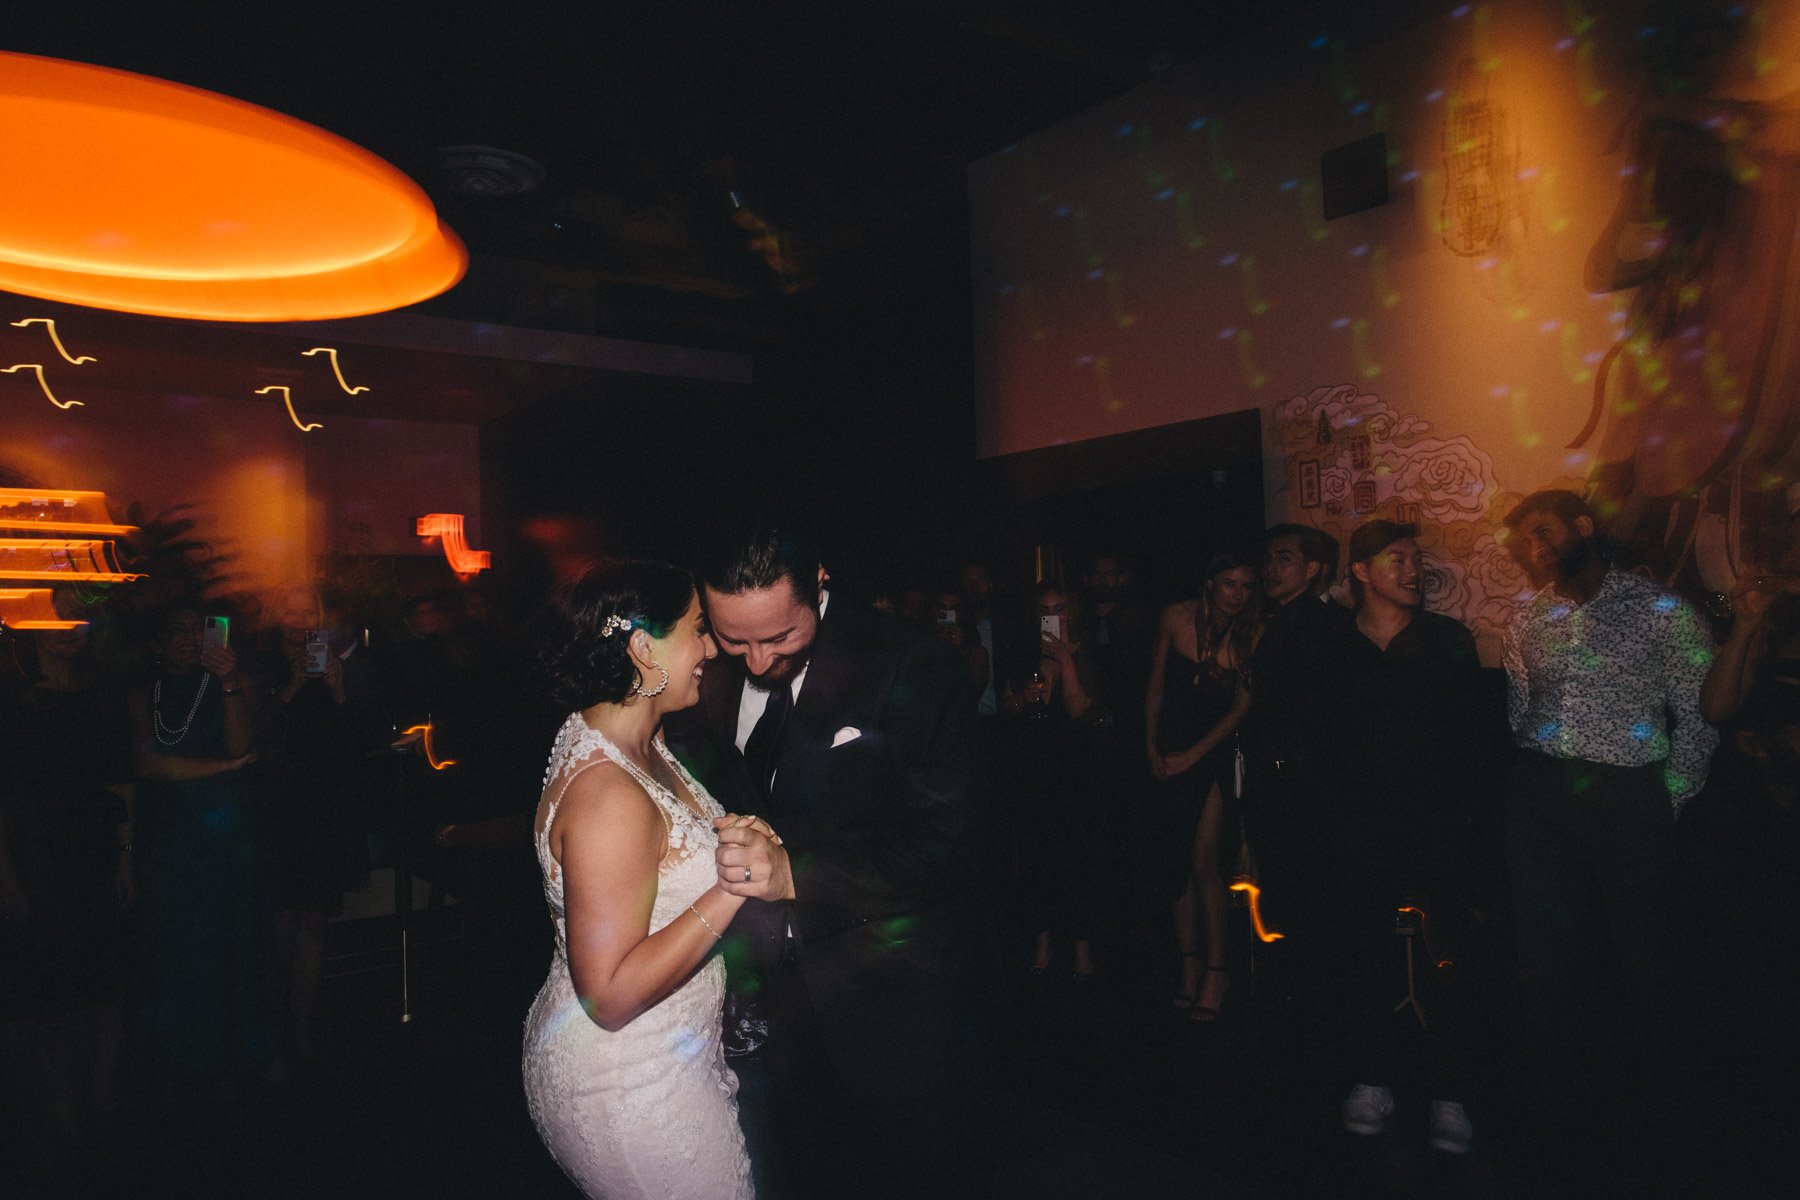 The first dance at a Moongate Lounge wedding